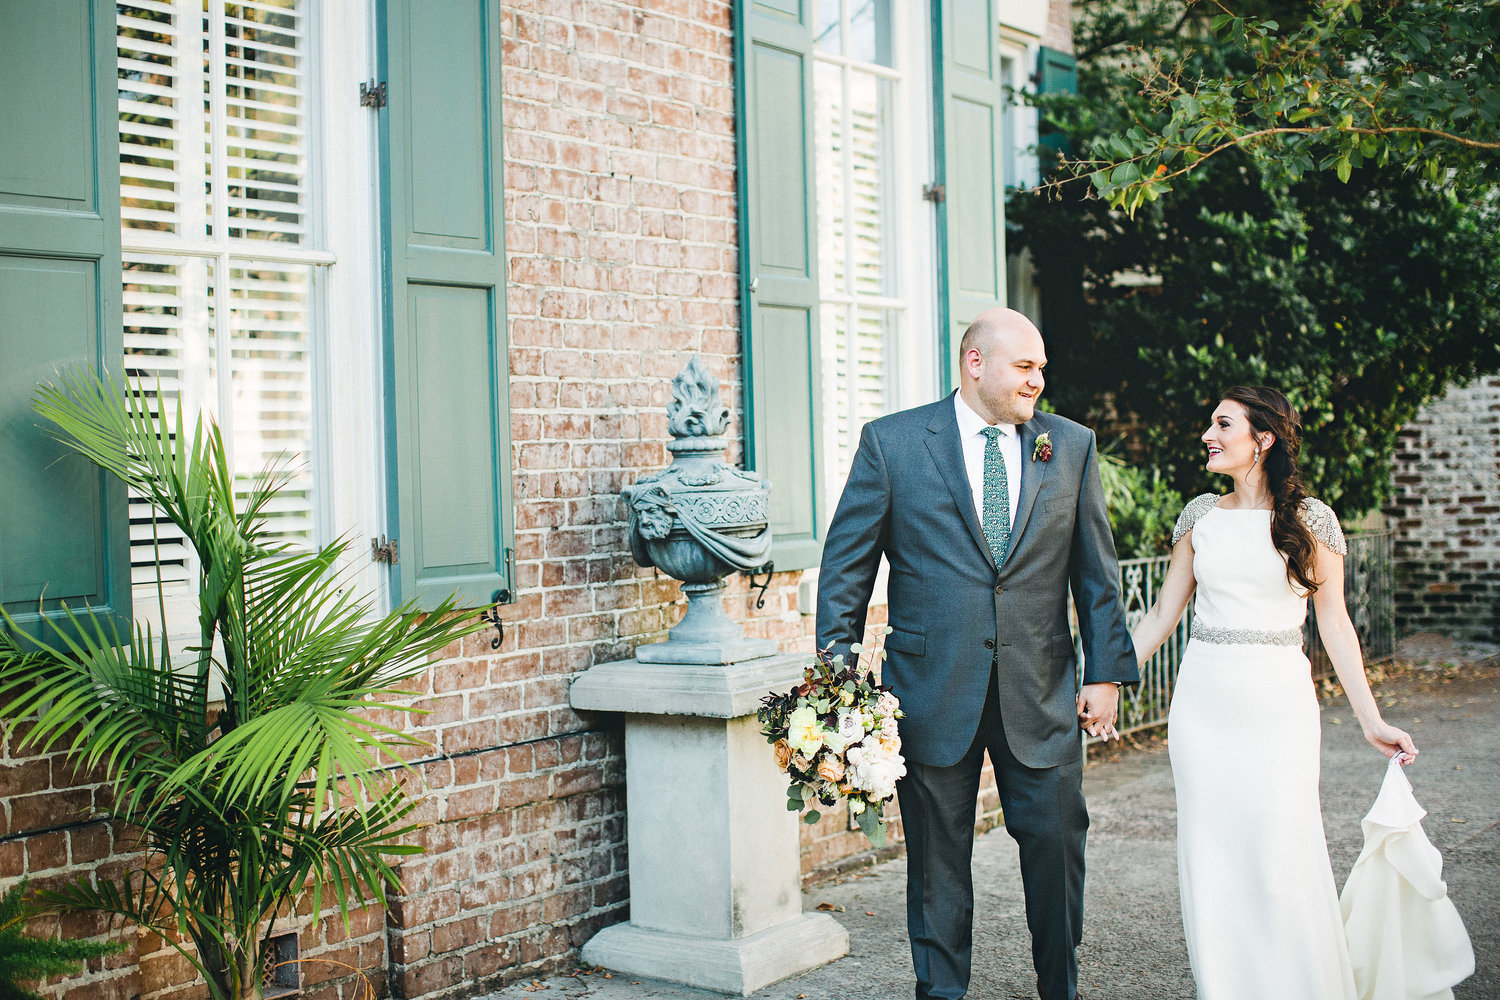 izzy-hudgins-photography-savannah-wedding-ivory-and-beau-bridal-boutique-savannah-wedding-planner-colonial-house-of-flowers-forsyth-park-wedding-old-fort-jackson-wedding-squidwed-films-savannah-boutique-savannah-weddings-14.jpg